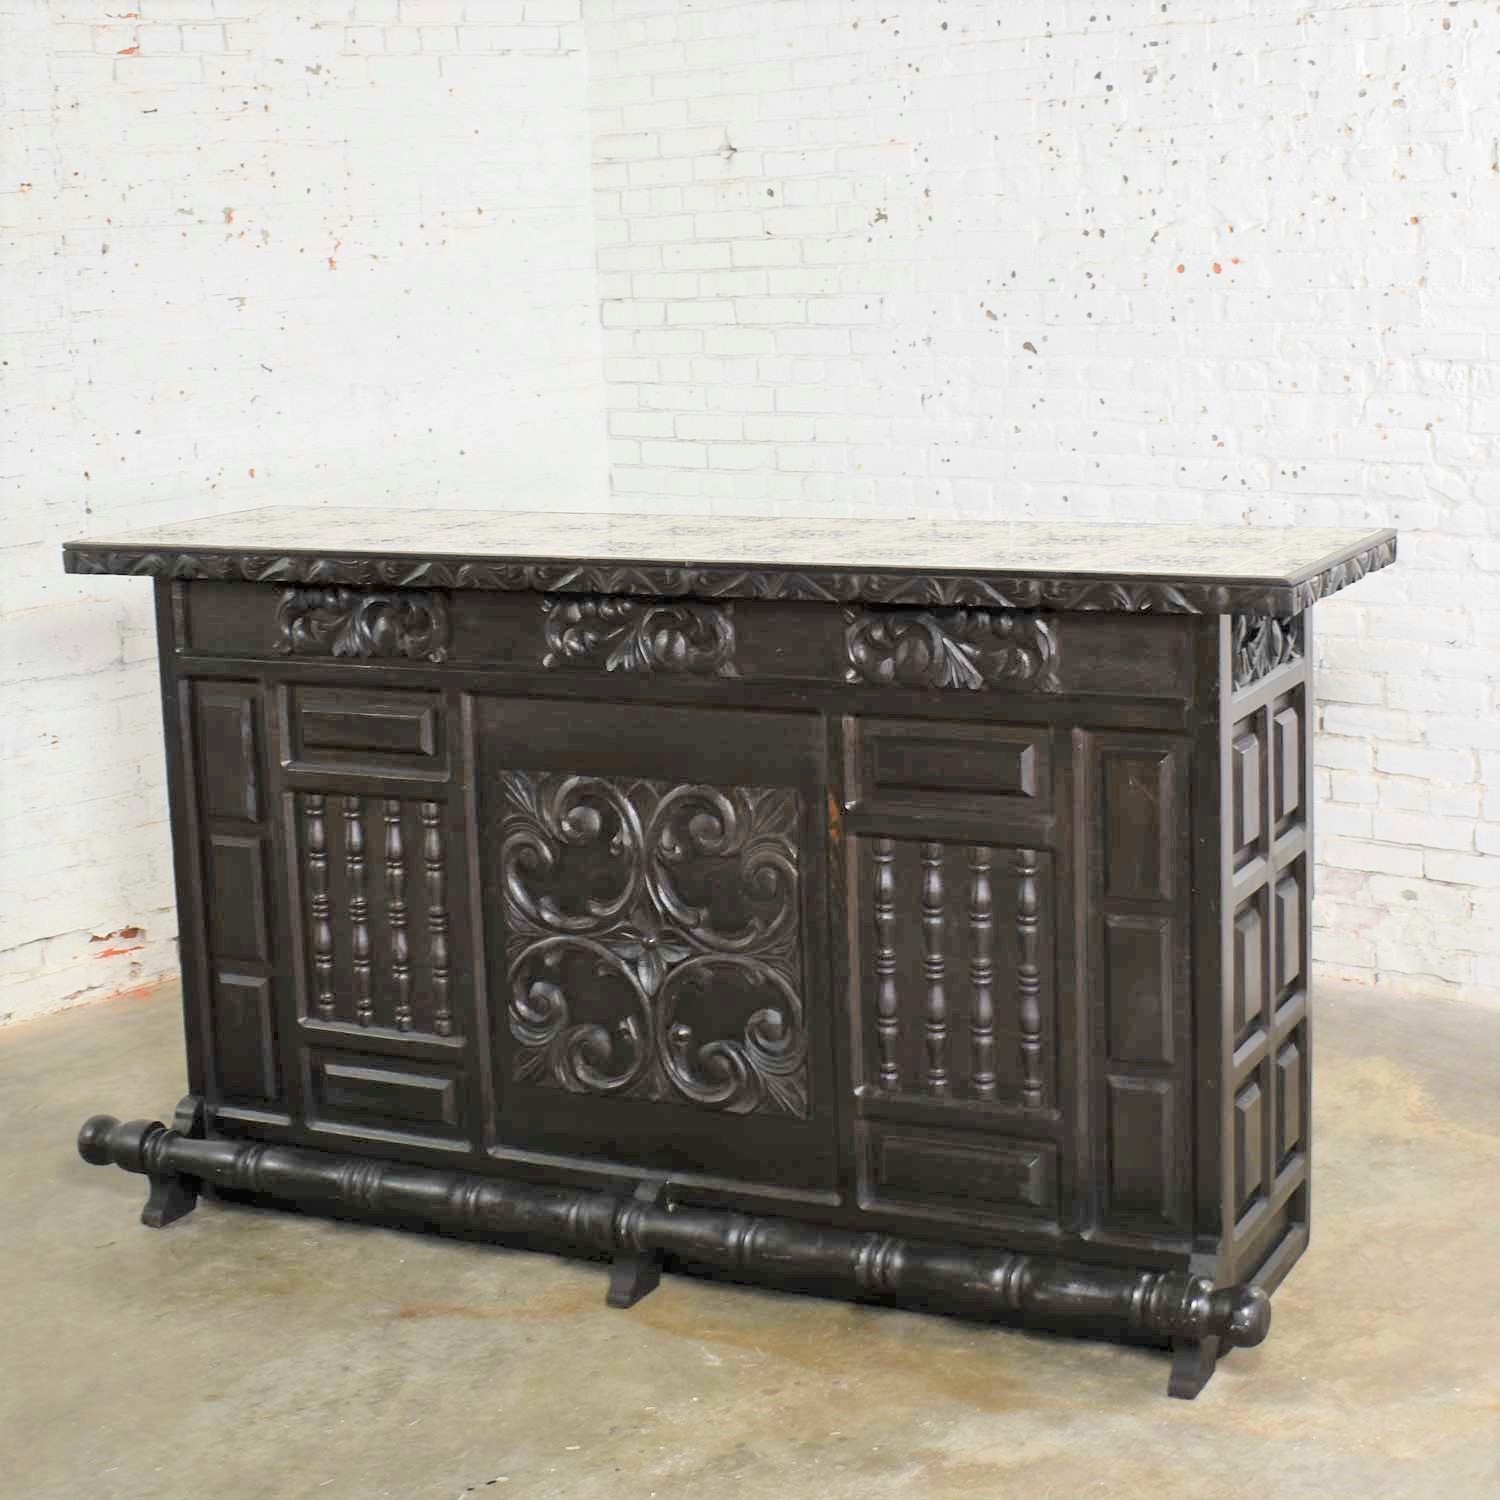 Vintage Spanish Revival Style Dry Bar with Inlaid Tile Top in Style of Artes de Mexico